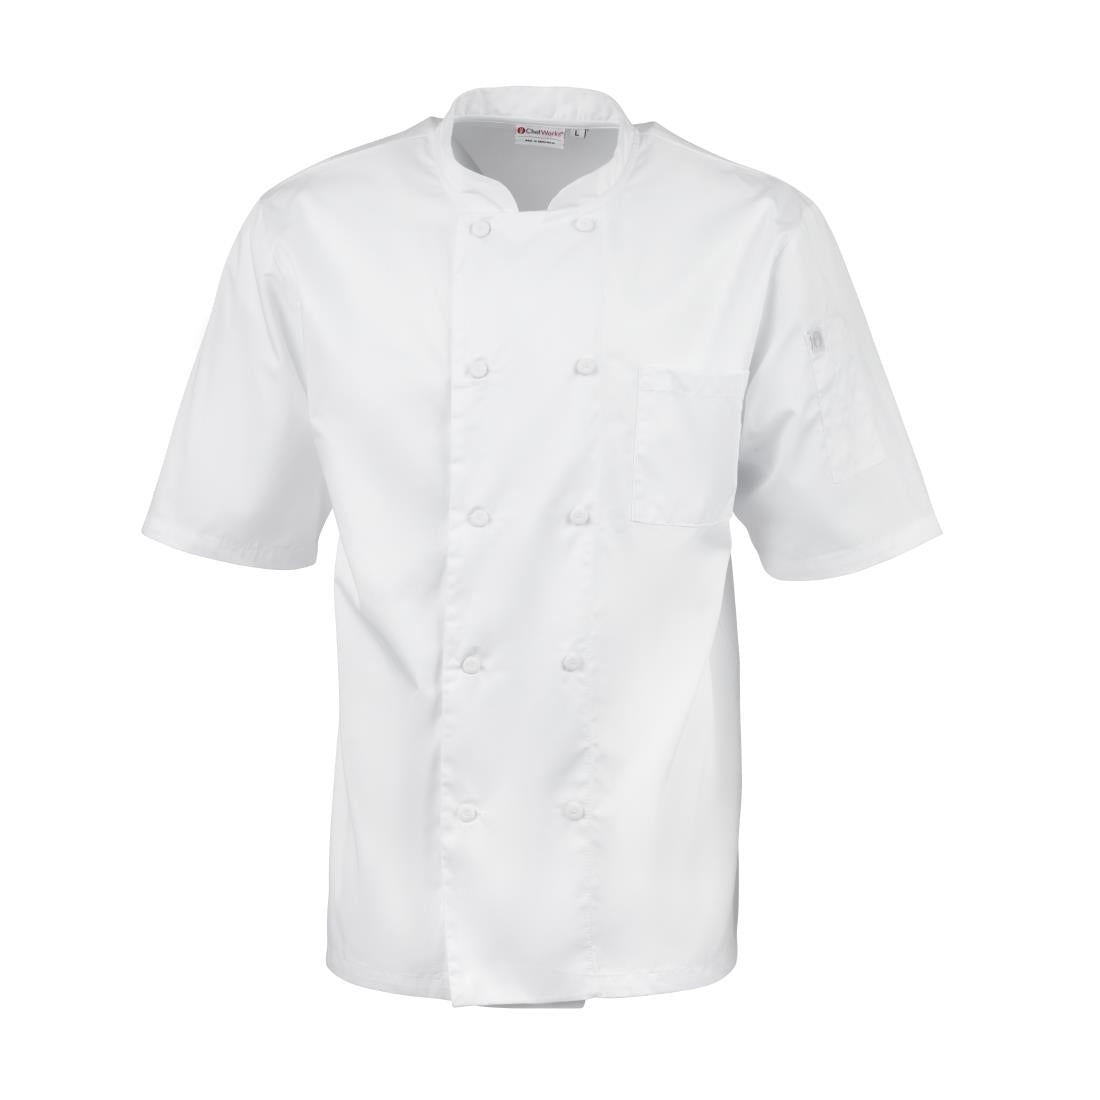 A914-S Chefs Works Montreal Cool Vent Unisex Short Sleeve Chefs Jacket White S